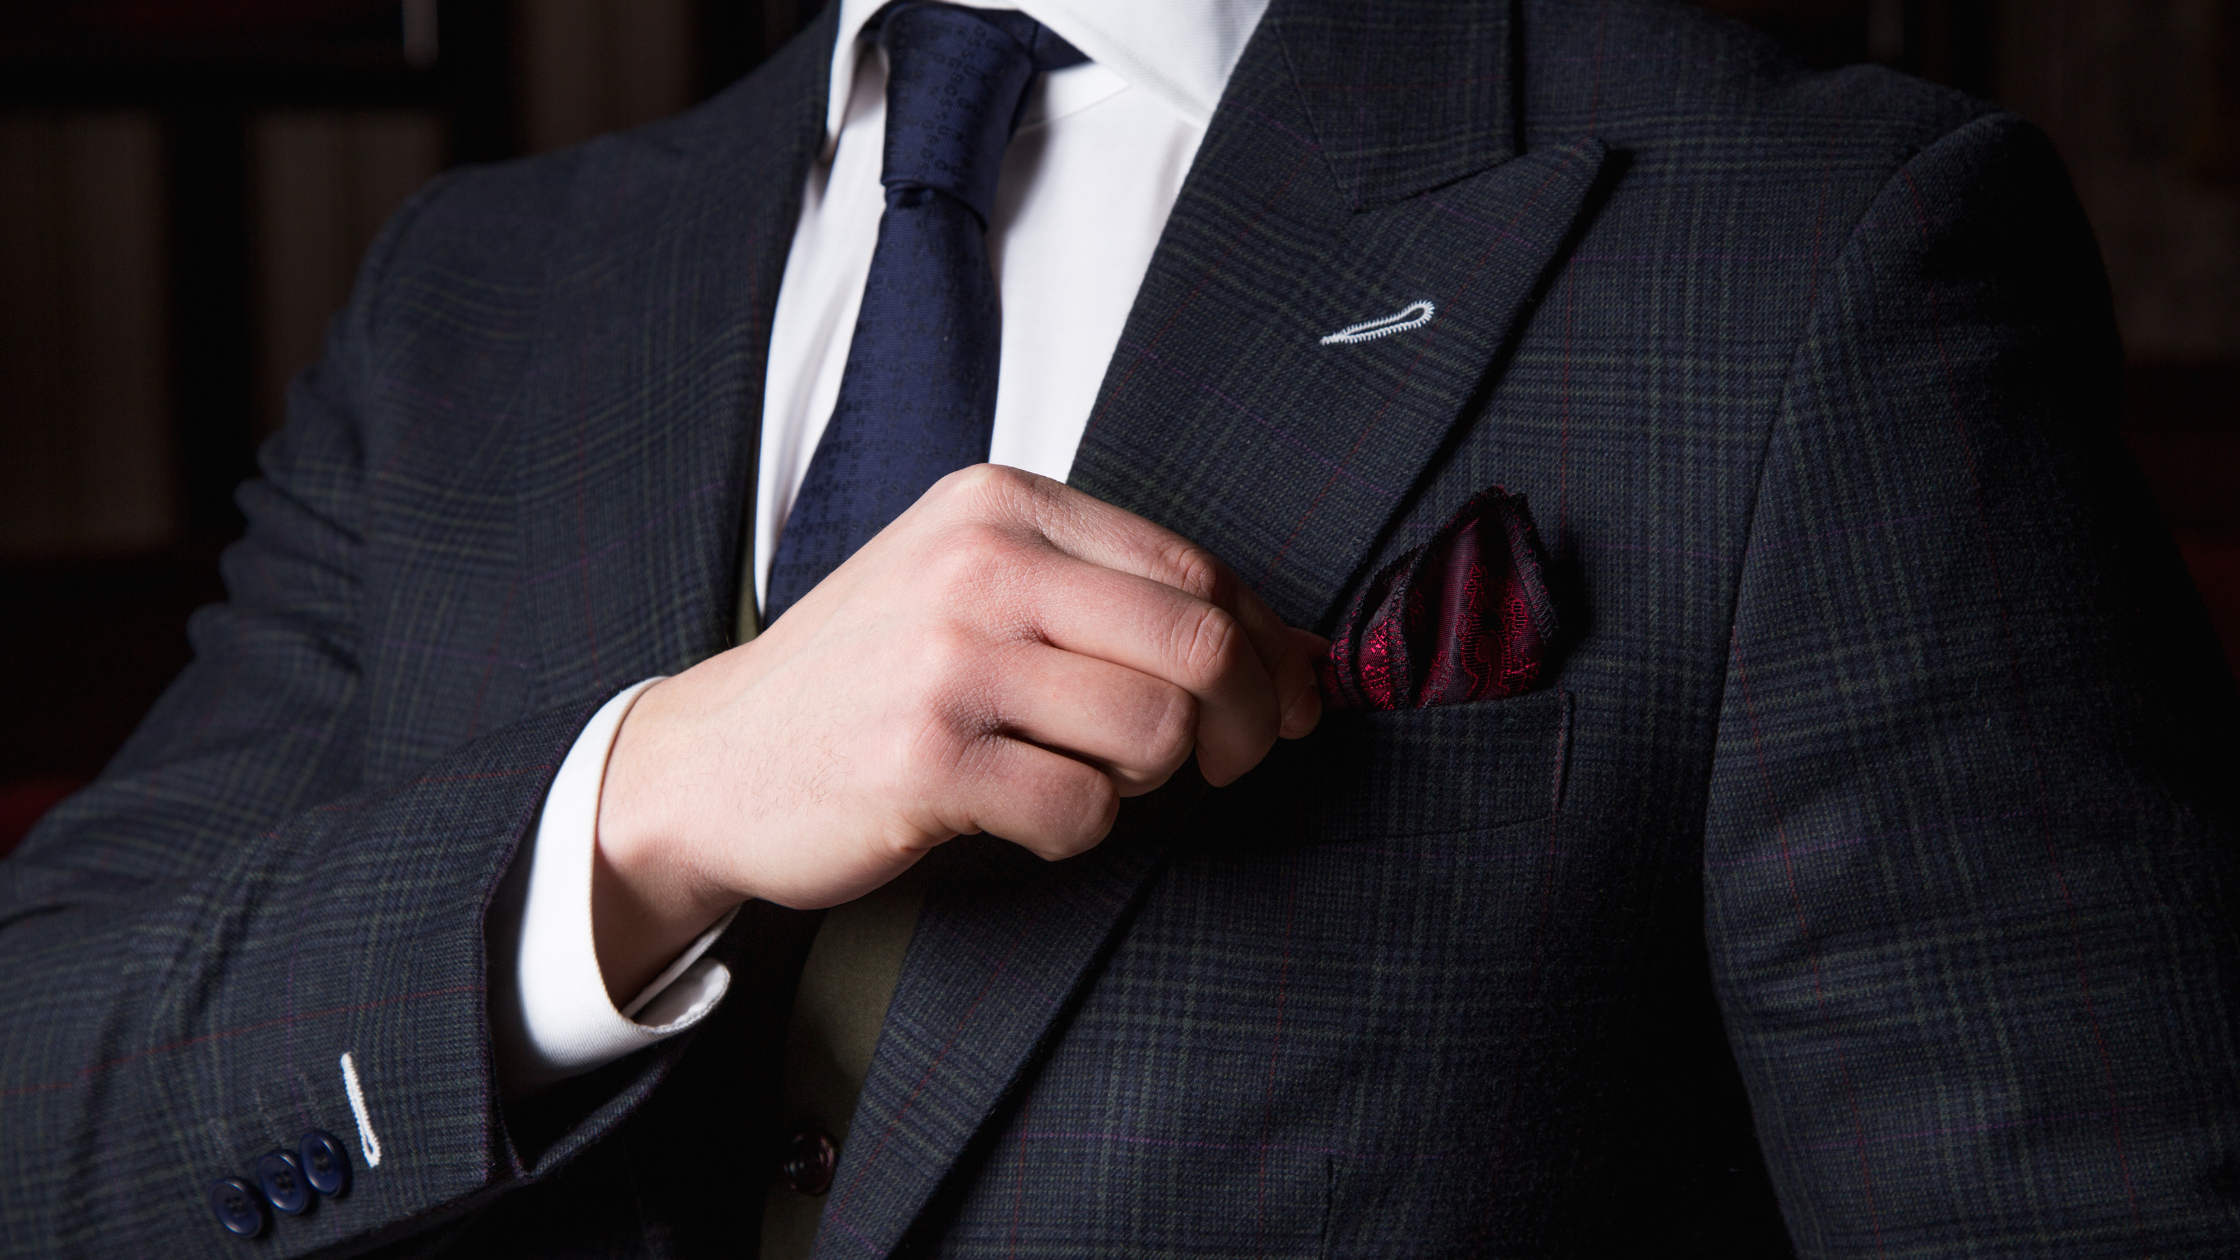 How To A Fold Pocket Square For A Wedding